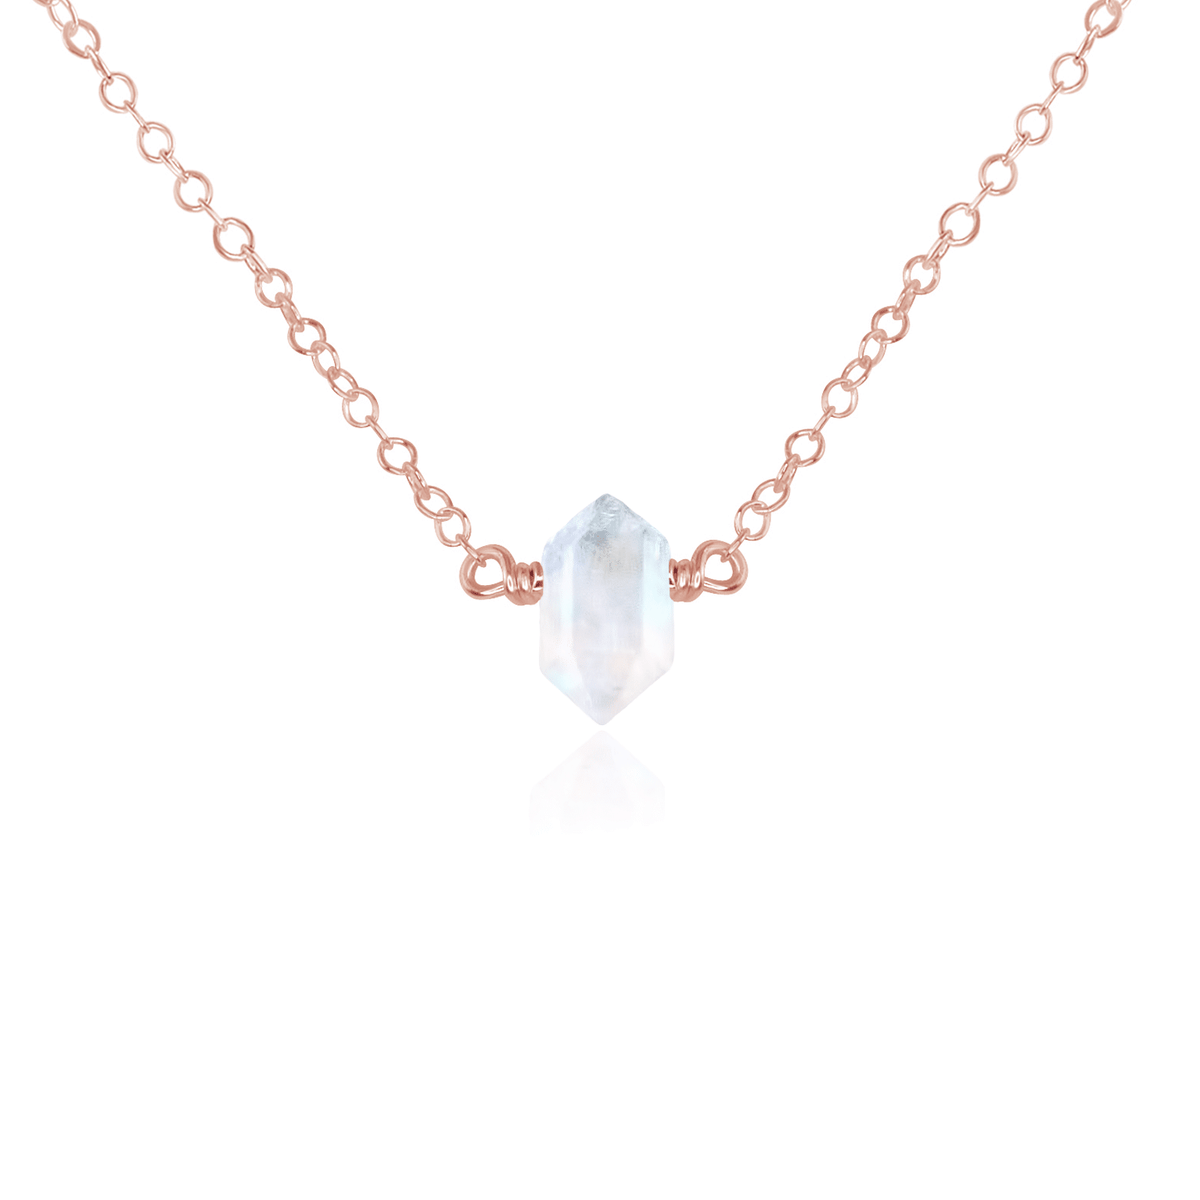 Double Terminated Crystal Necklace - Rainbow Moonstone - 14K Rose Gold Fill - Luna Tide Handmade Jewellery